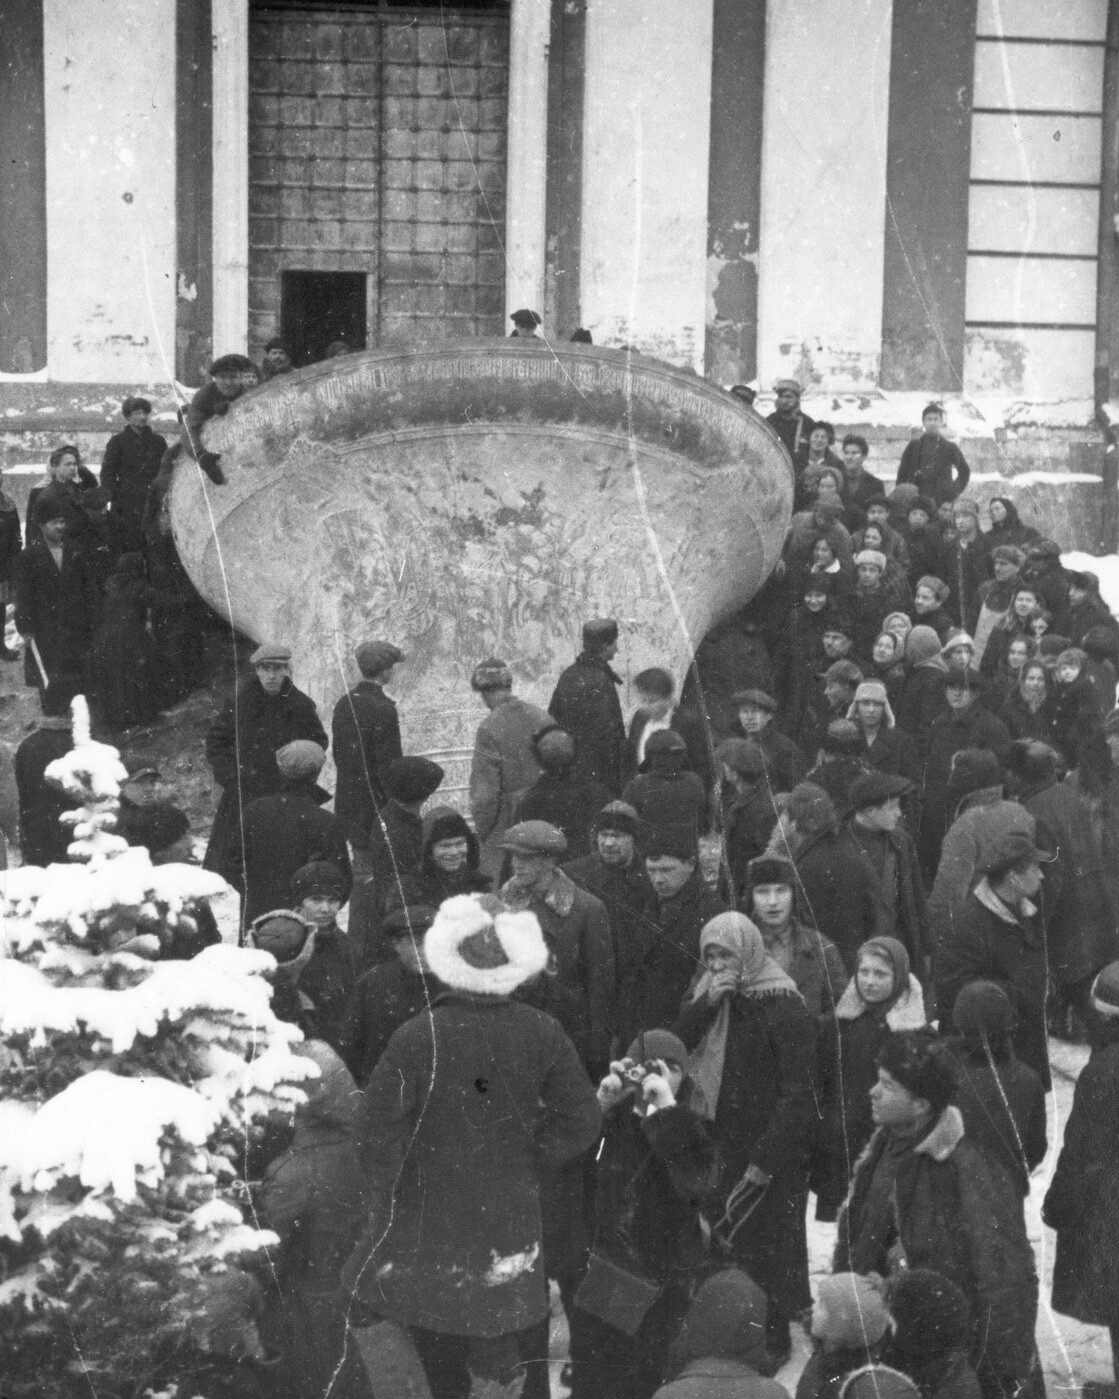 The Bolsheviks throwing the bell from the bell tower 